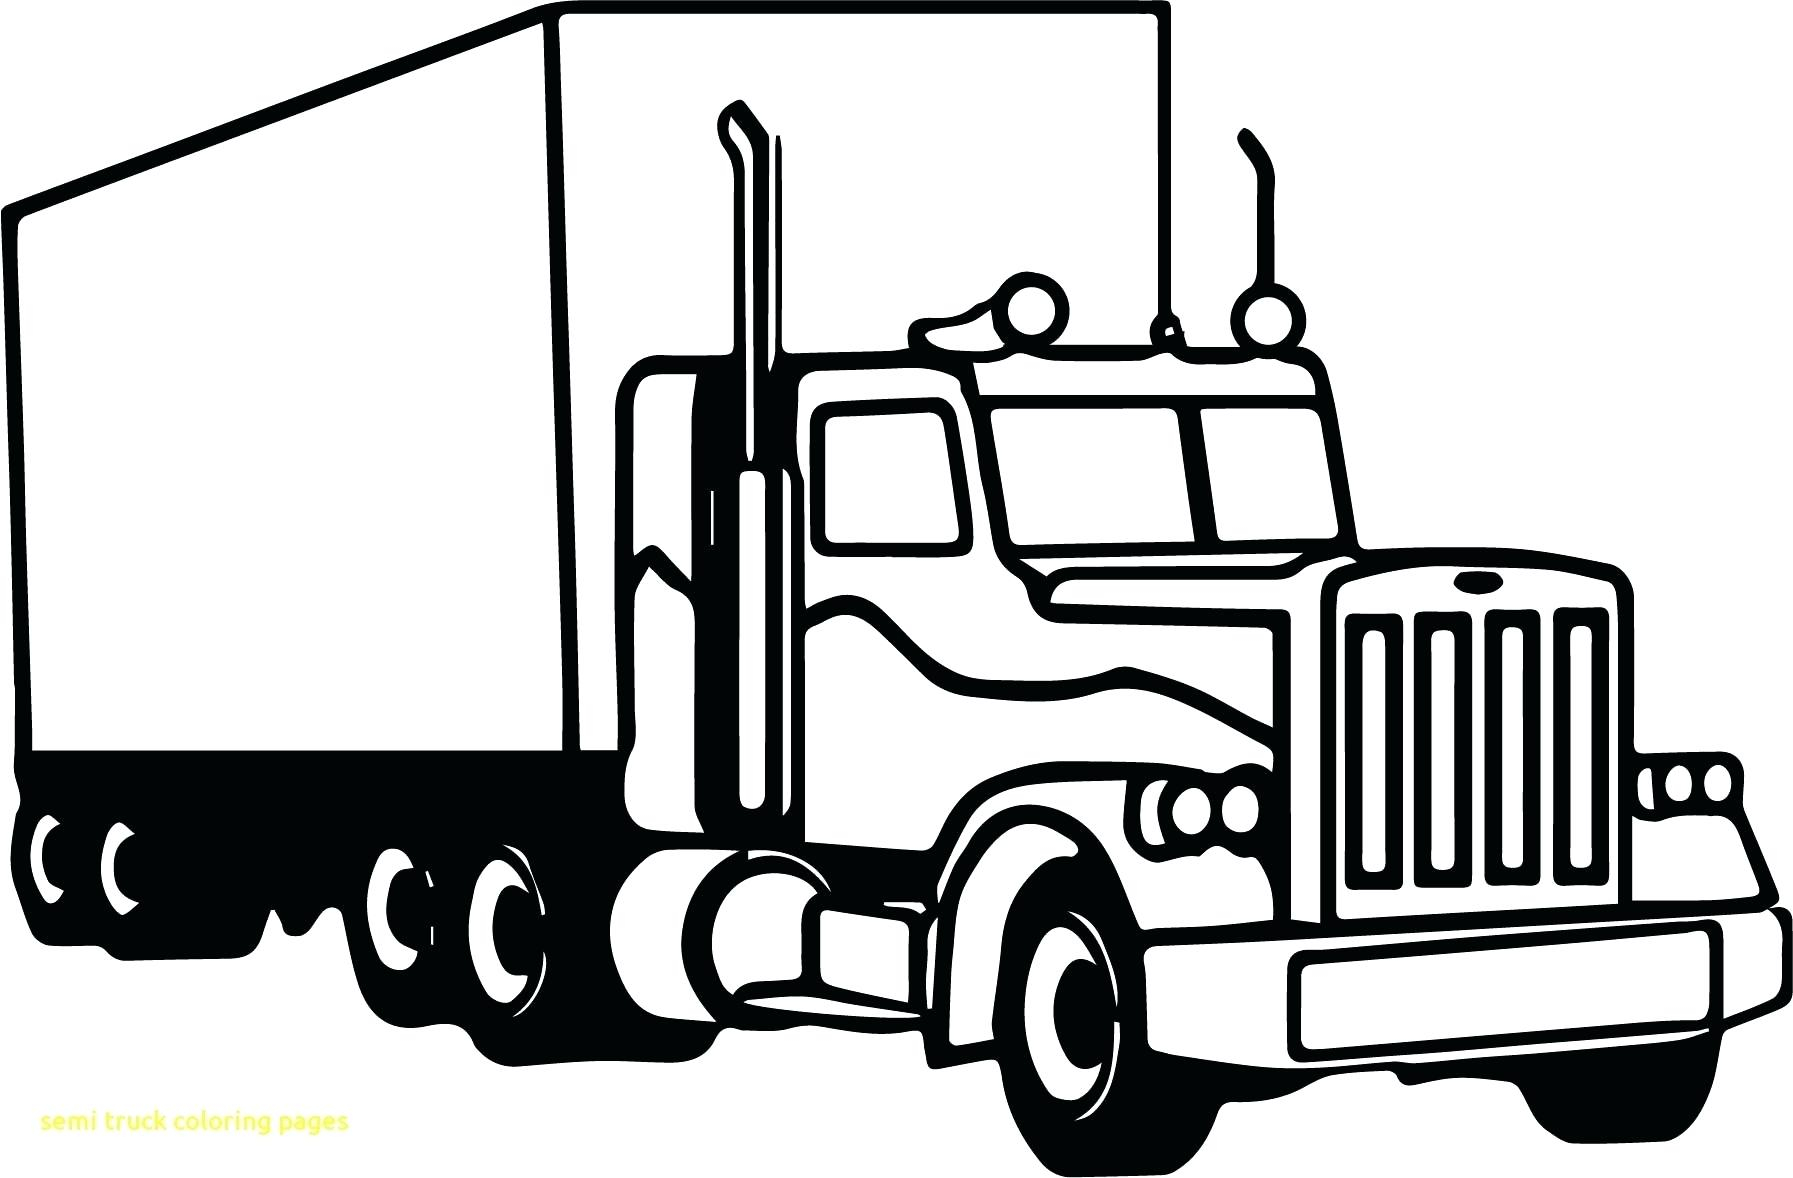 Big Truck Coloring Pages Cozy Garbage Truck Coloring Pages To Print Cortexcolorco